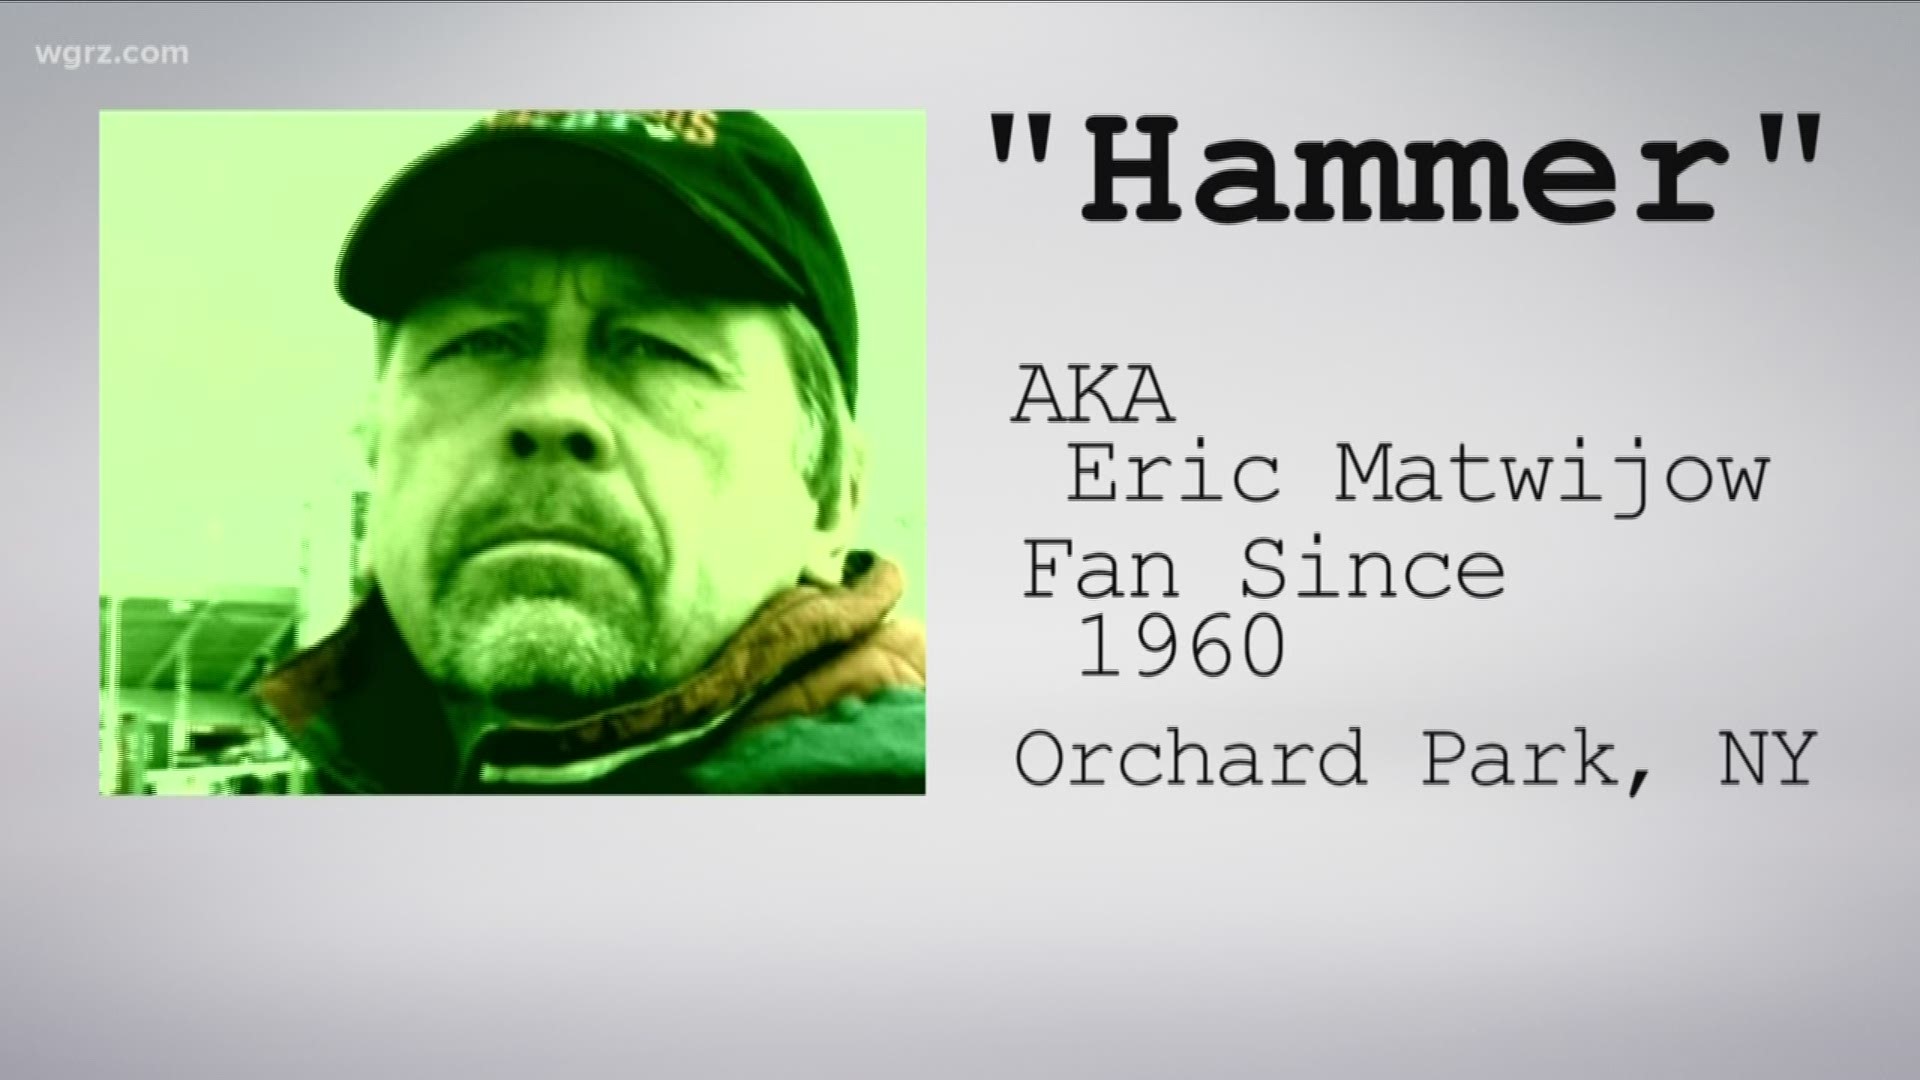 Long before the Bills called Buffalo home, the area that holds New Era Field sat in the backyard of one Bills Mafia original fan. Now, he runs one of the most successful tailgate scenes in all of Western New York. Meet The Mafia continues with the man behind Hammer's Lot.